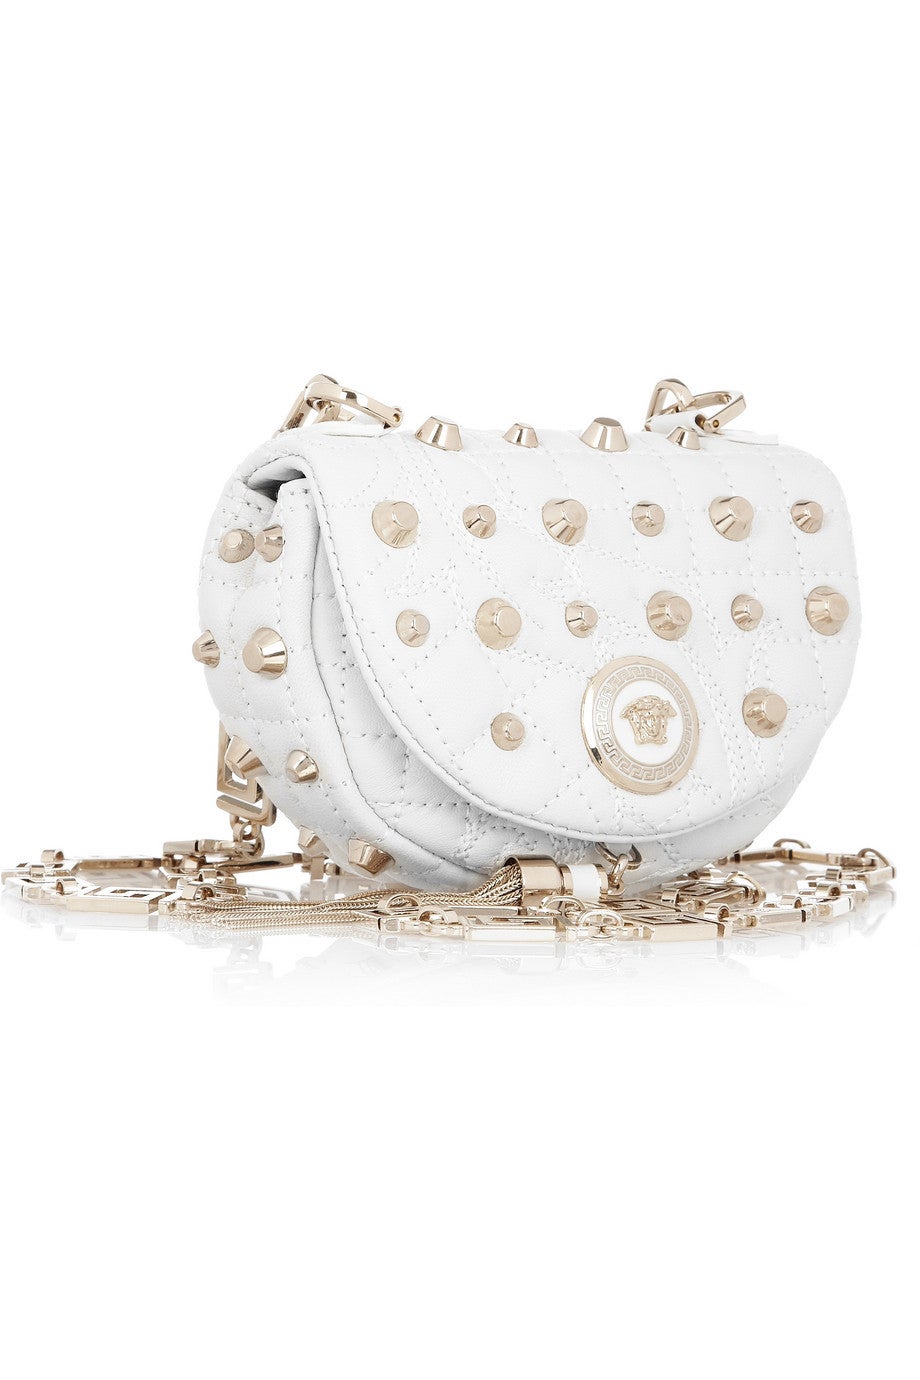 VERSACE

Unmistakably Versace, this compact studded shoulder bag packs a glamorous punch. 

Embellished with the brand’s signature gold plaque, this high-octane style is ideal for dancing the night away hands-free. Or wear the strap like a